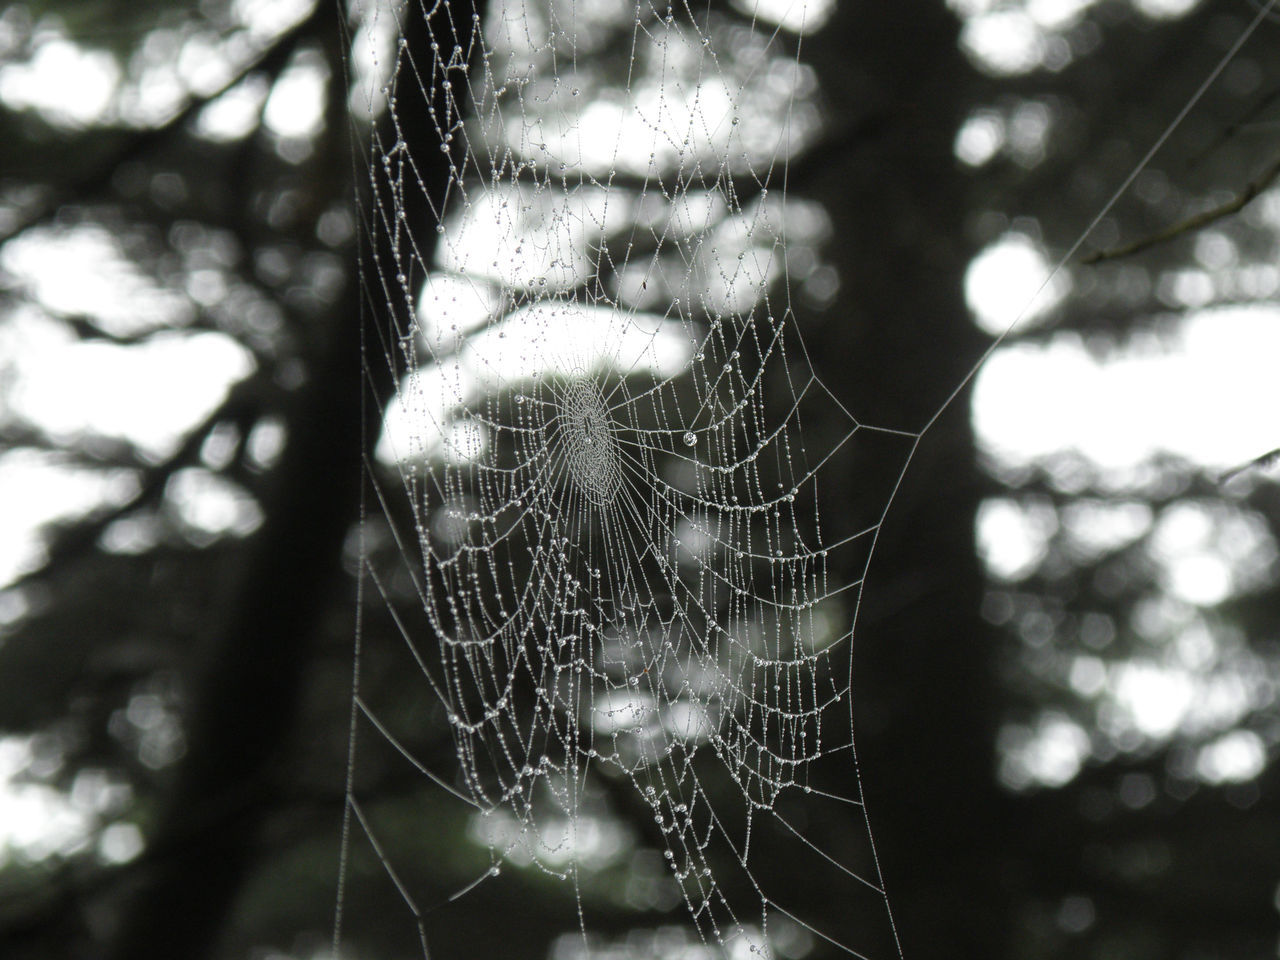 spider web, fragility, black and white, close-up, focus on foreground, nature, plant, animal themes, animal, tree, monochrome, no people, spider, day, monochrome photography, black, beauty in nature, arachnid, outdoors, one animal, intricacy, animal wildlife, complexity, wildlife, macro photography, selective focus, sunlight, trapped, tranquility, pattern, branch, growth, insect